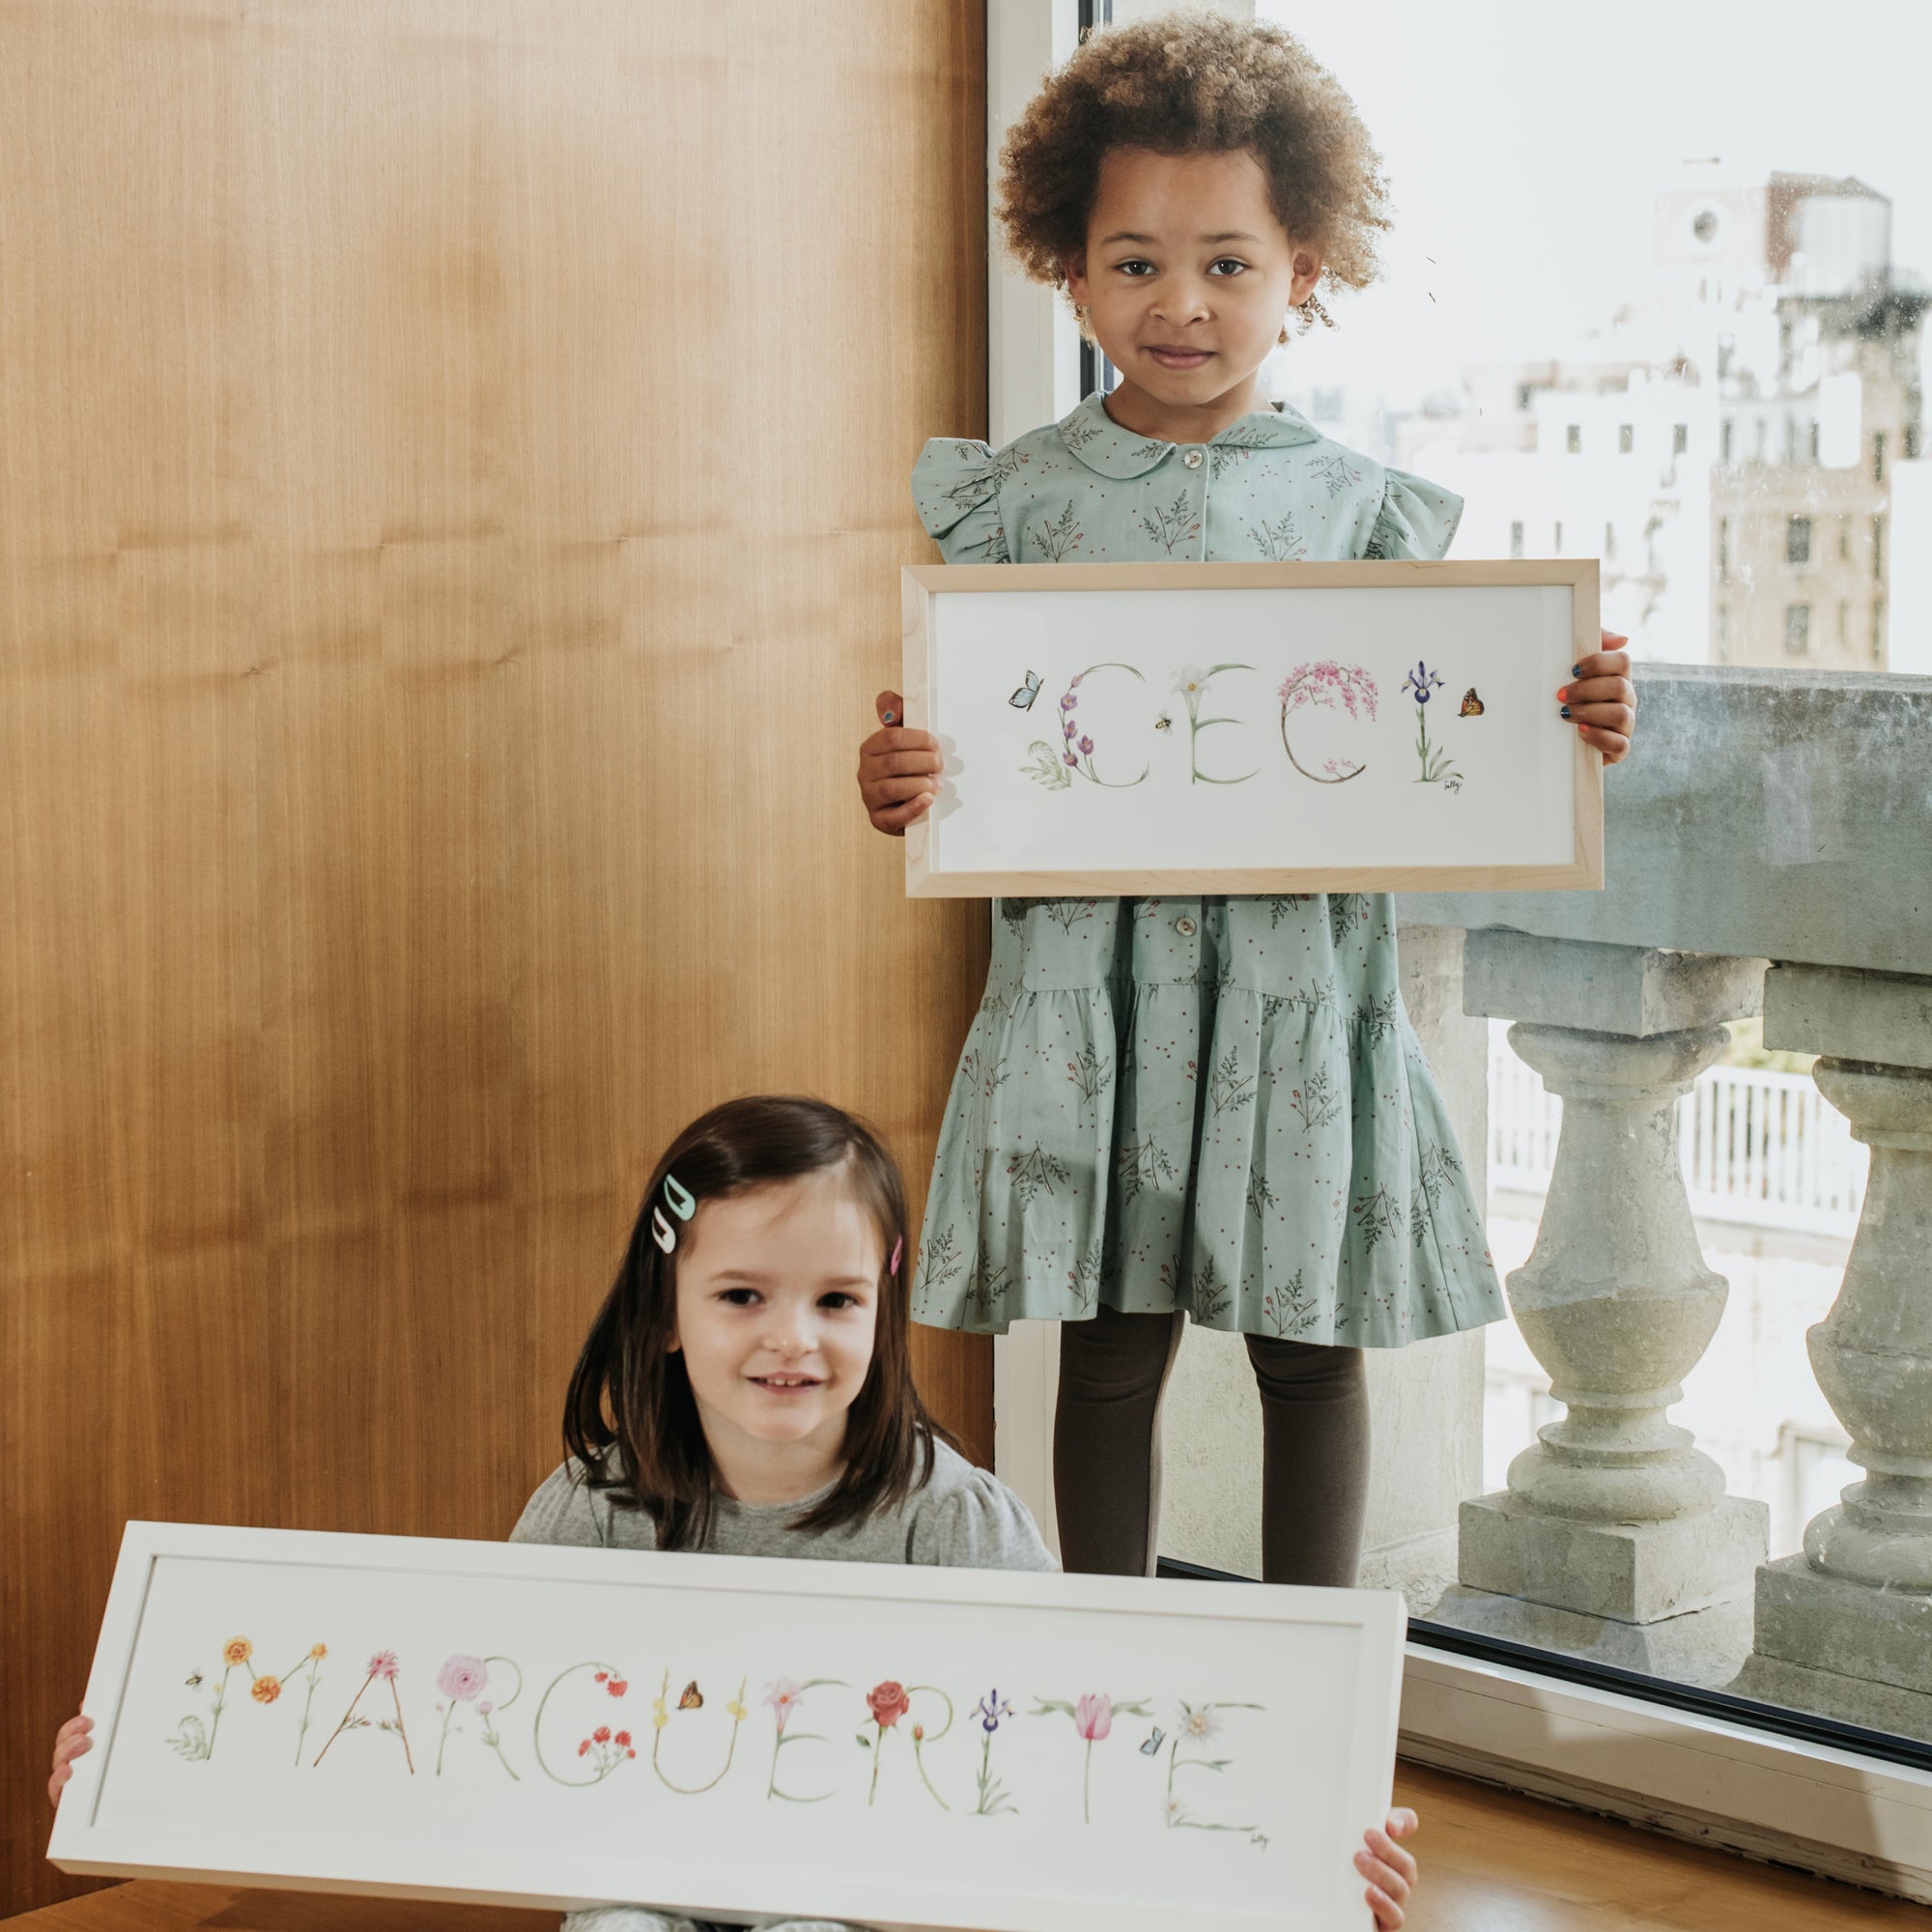 Ceci and Marguerite holding their Flower Name Prints by The Letter Nest